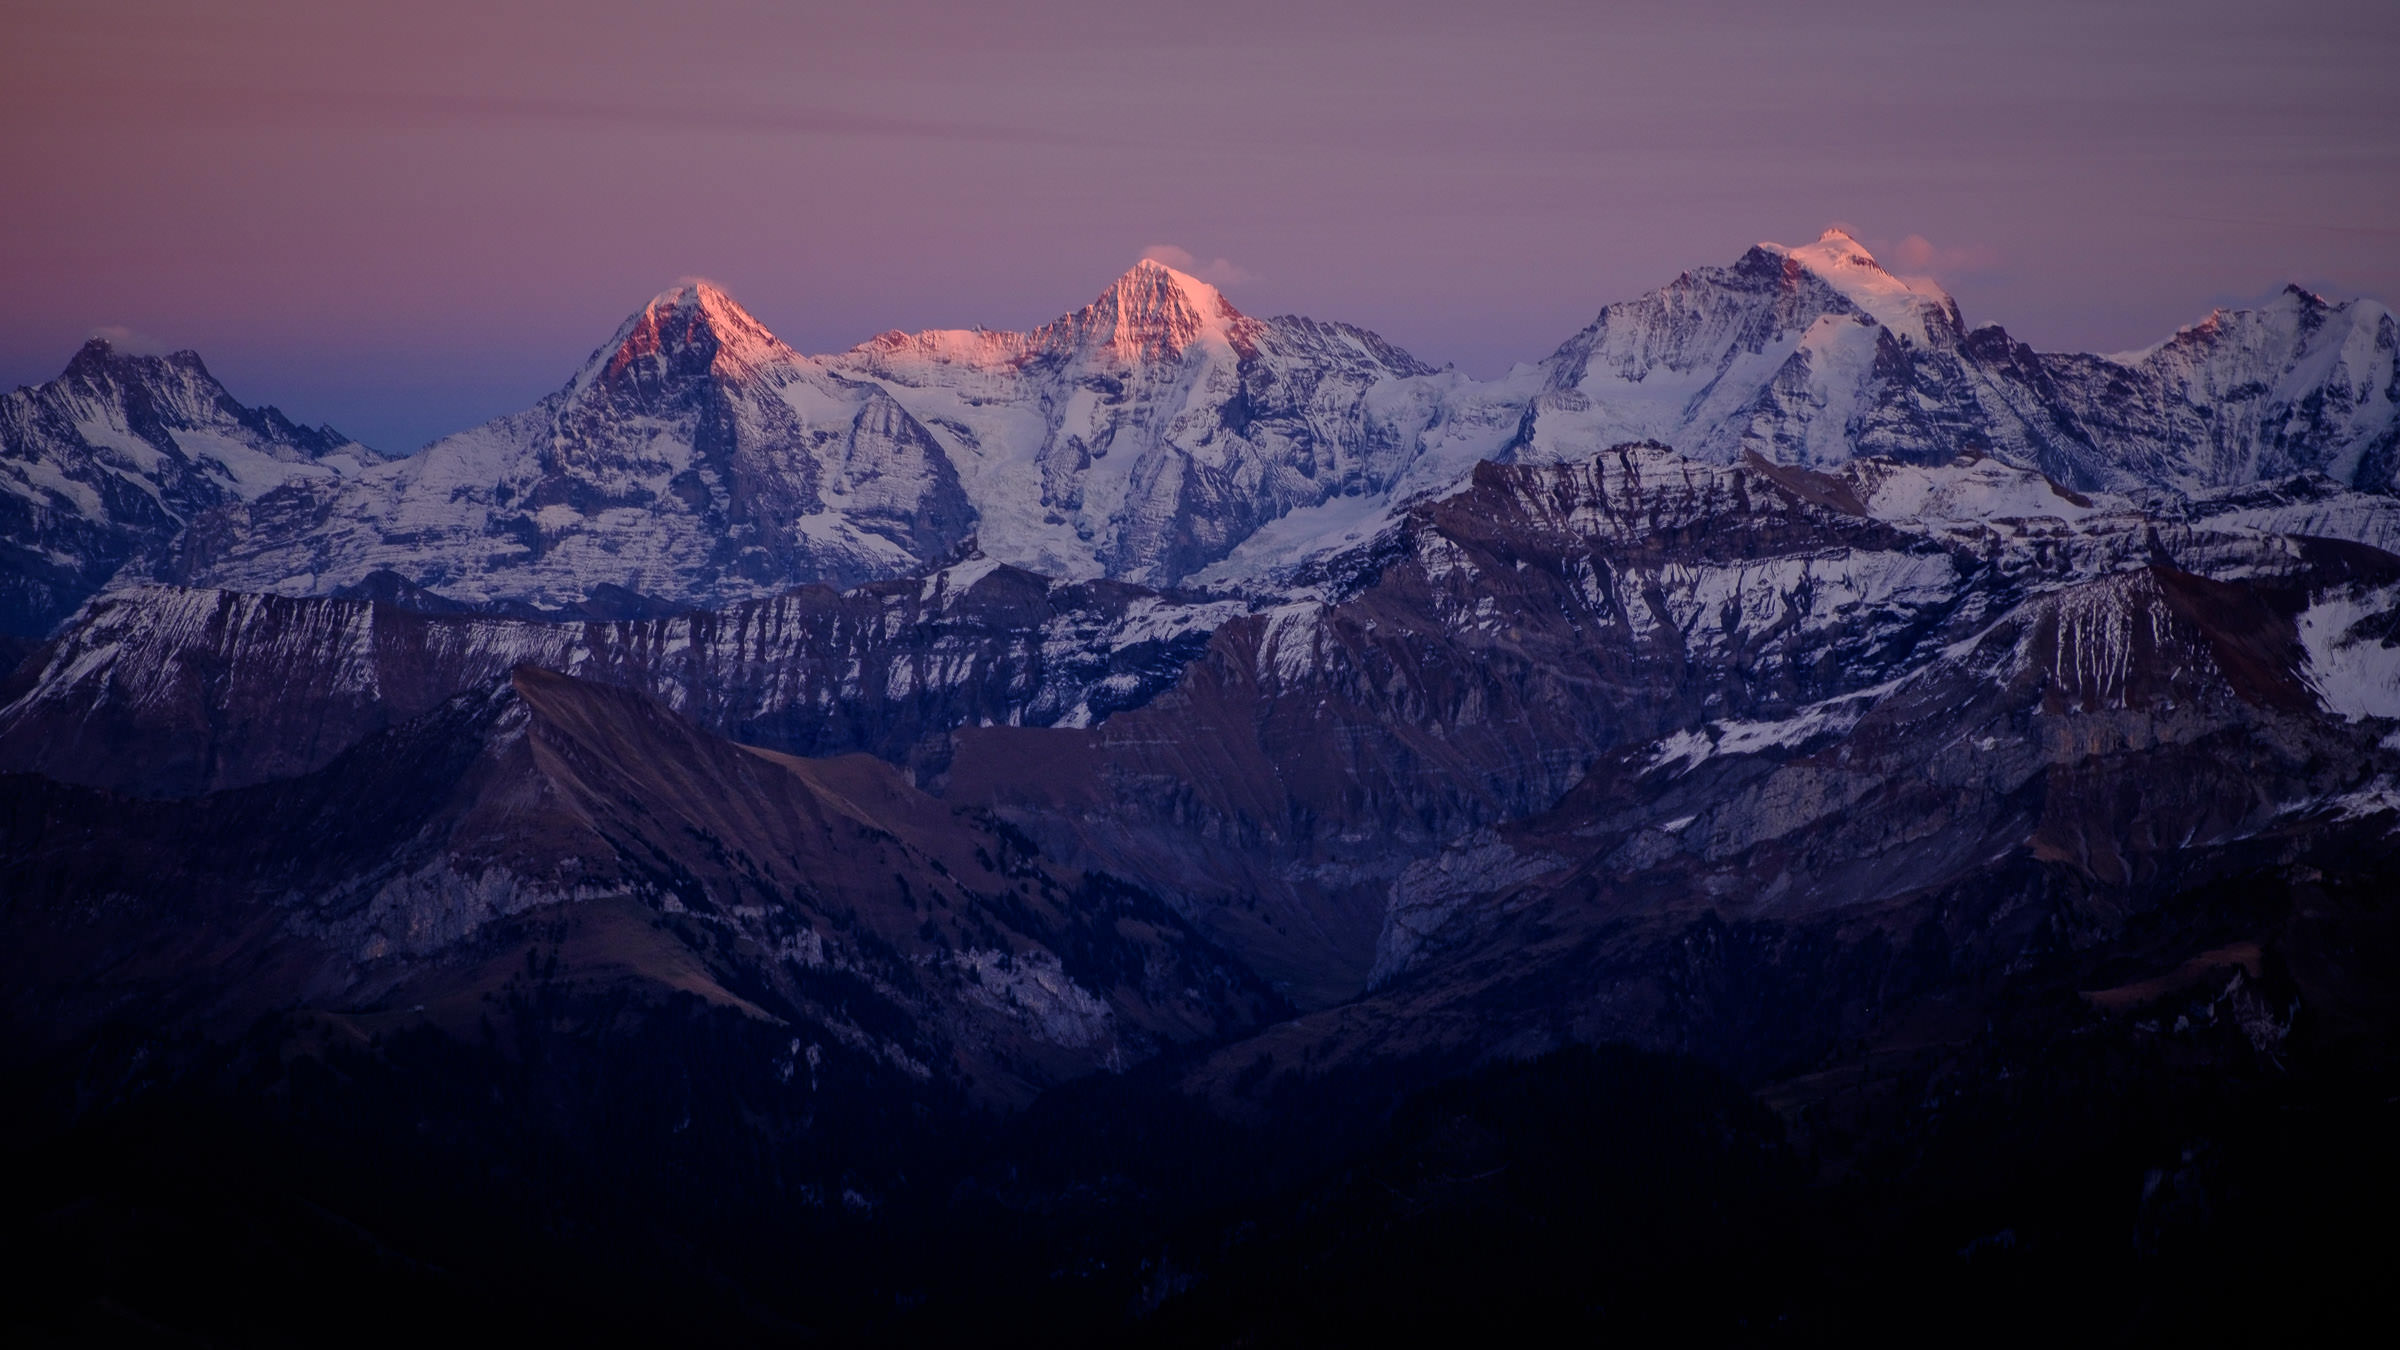 Evening light on the Eiger, Mönch and Jungfrau